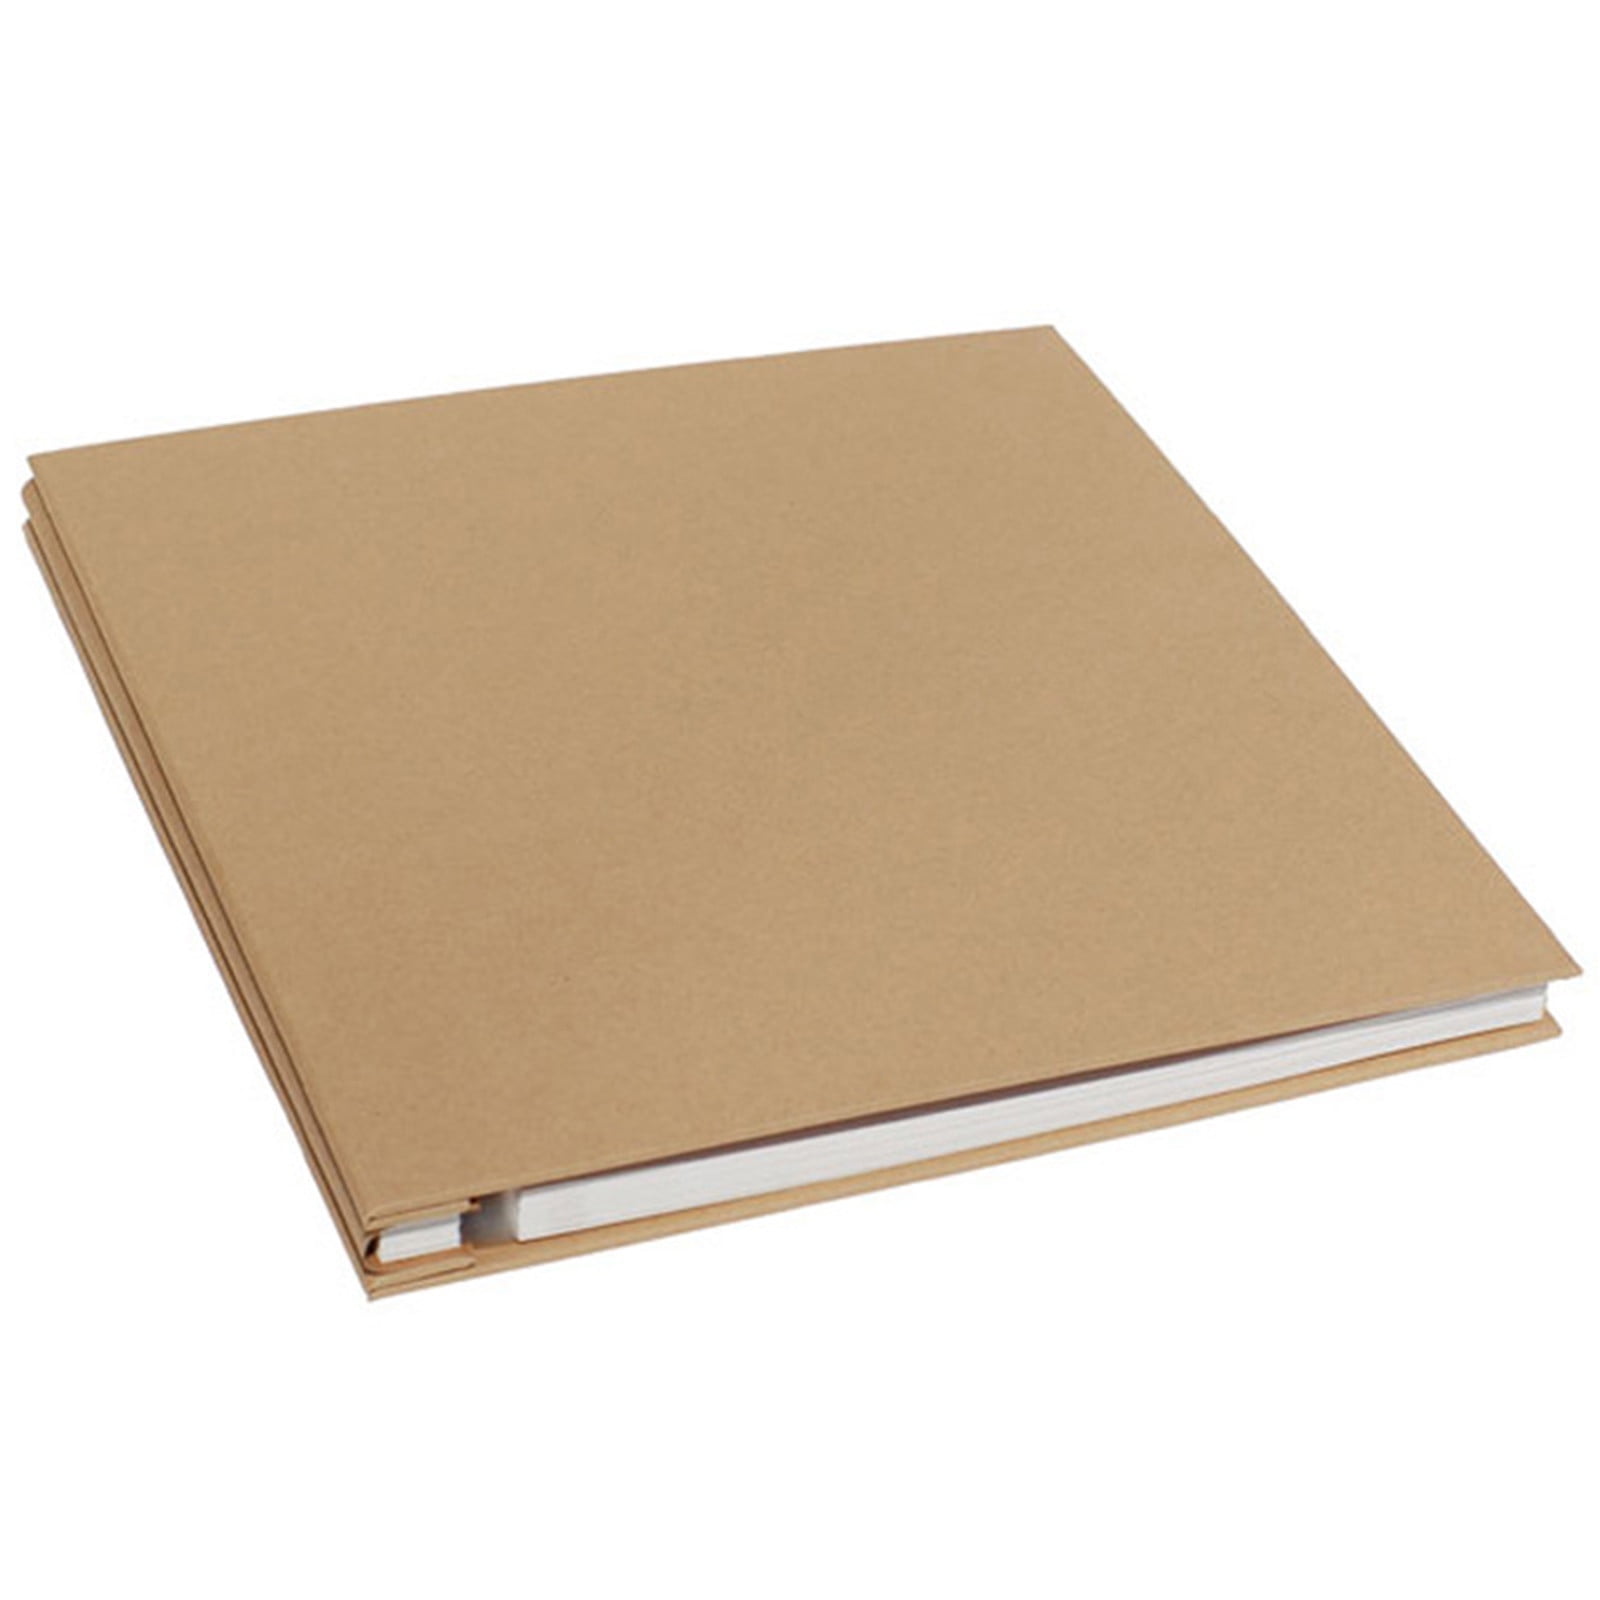  5x7 Photo Album Hold 52 Pictures - 2 Pack, Small Photo